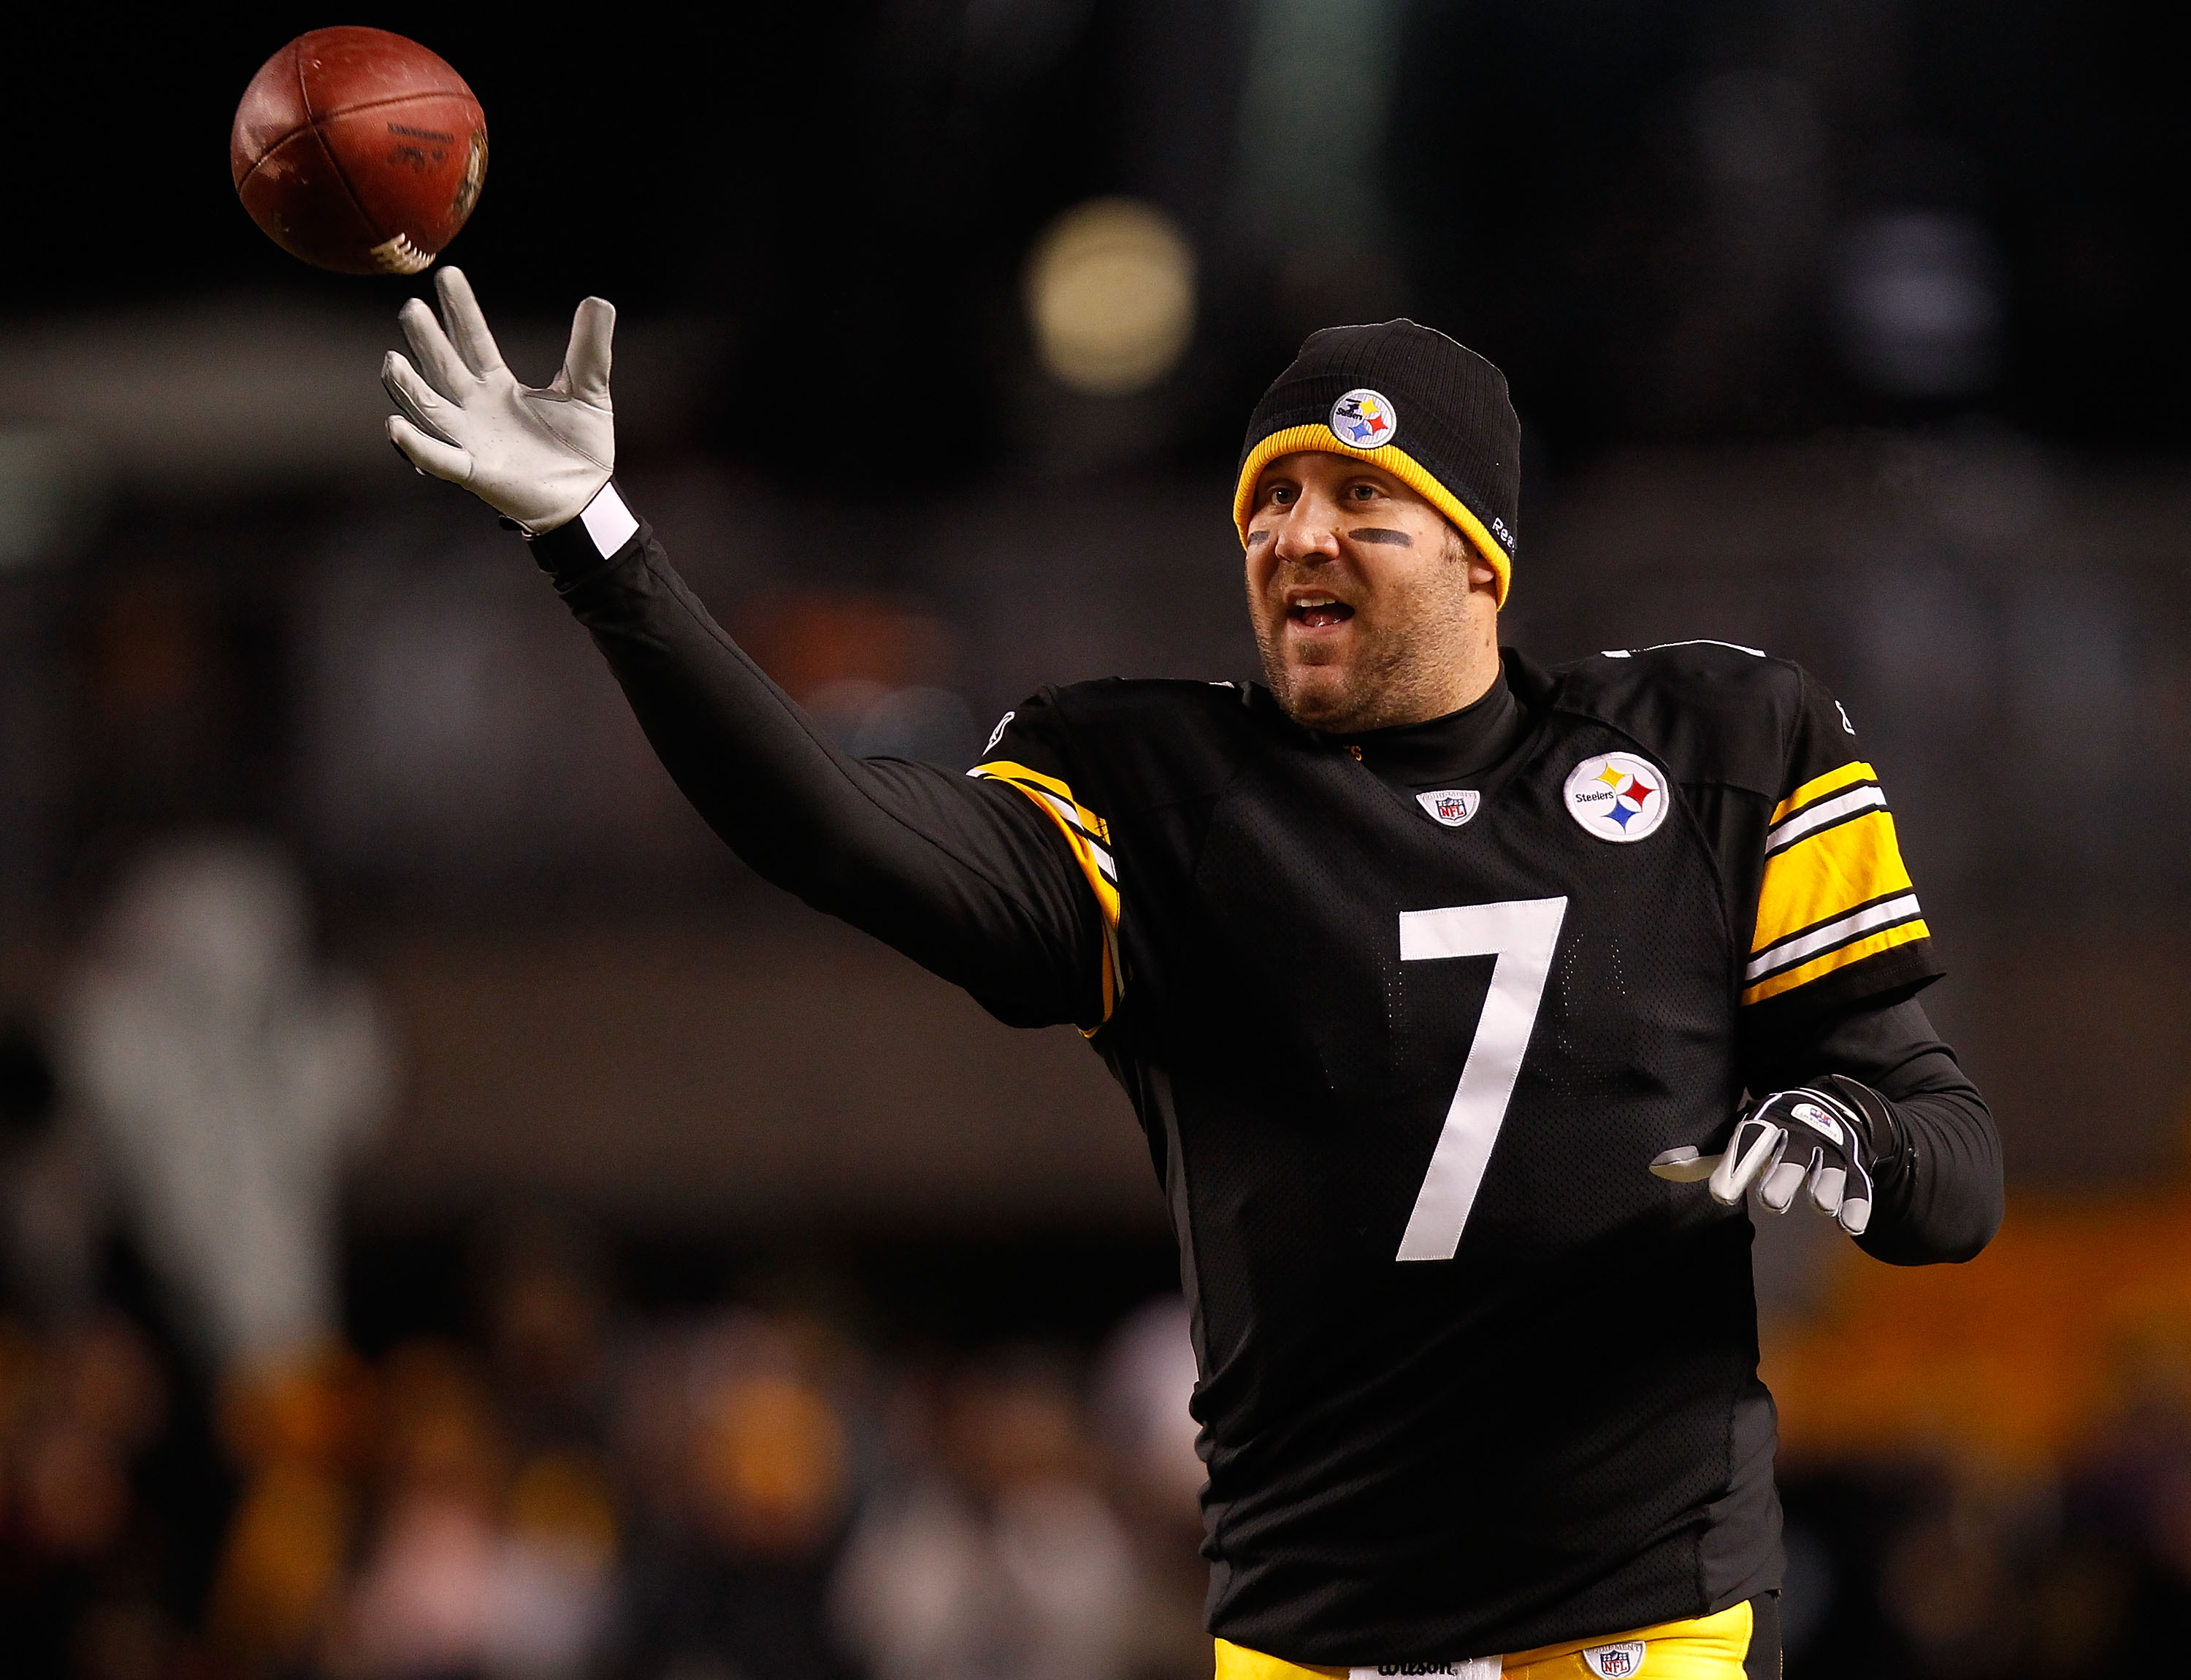 PITTSBURGH - DECEMBER 23:  Ben Roethlisberger #7 of the Pittsburgh Steelers warms up prior to the game against the Carolina Panthers on December 23, 2010 at Heinz Field in Pittsburgh, Pennsylvania.  (Photo by Jared Wickerham/Getty Images)